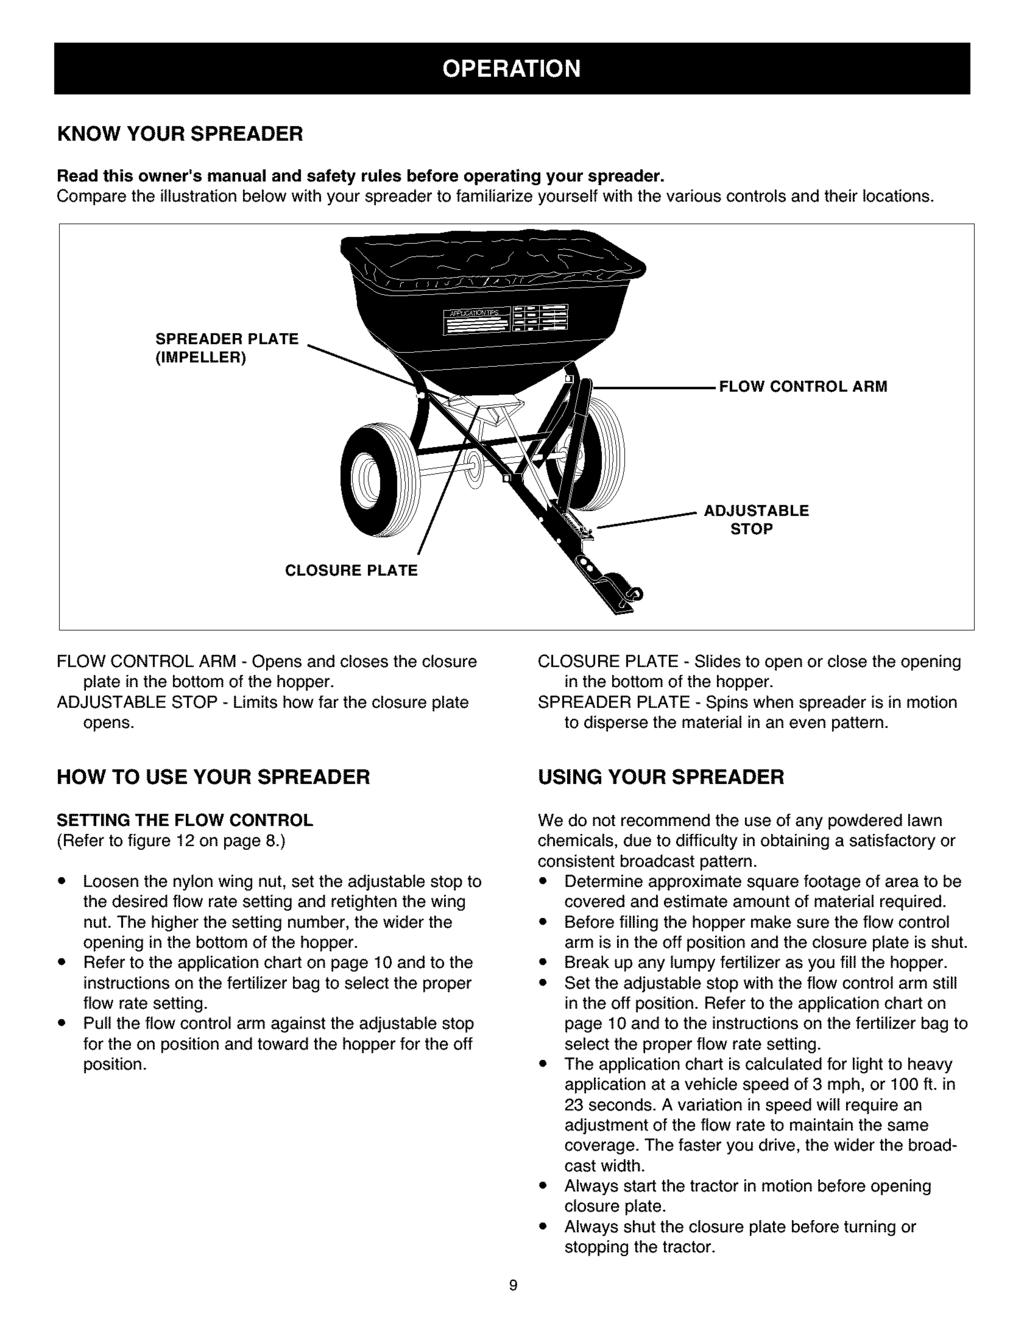 KNOW YOUR SPREADER Read this owner's manual and safety rules before operating your spreader.